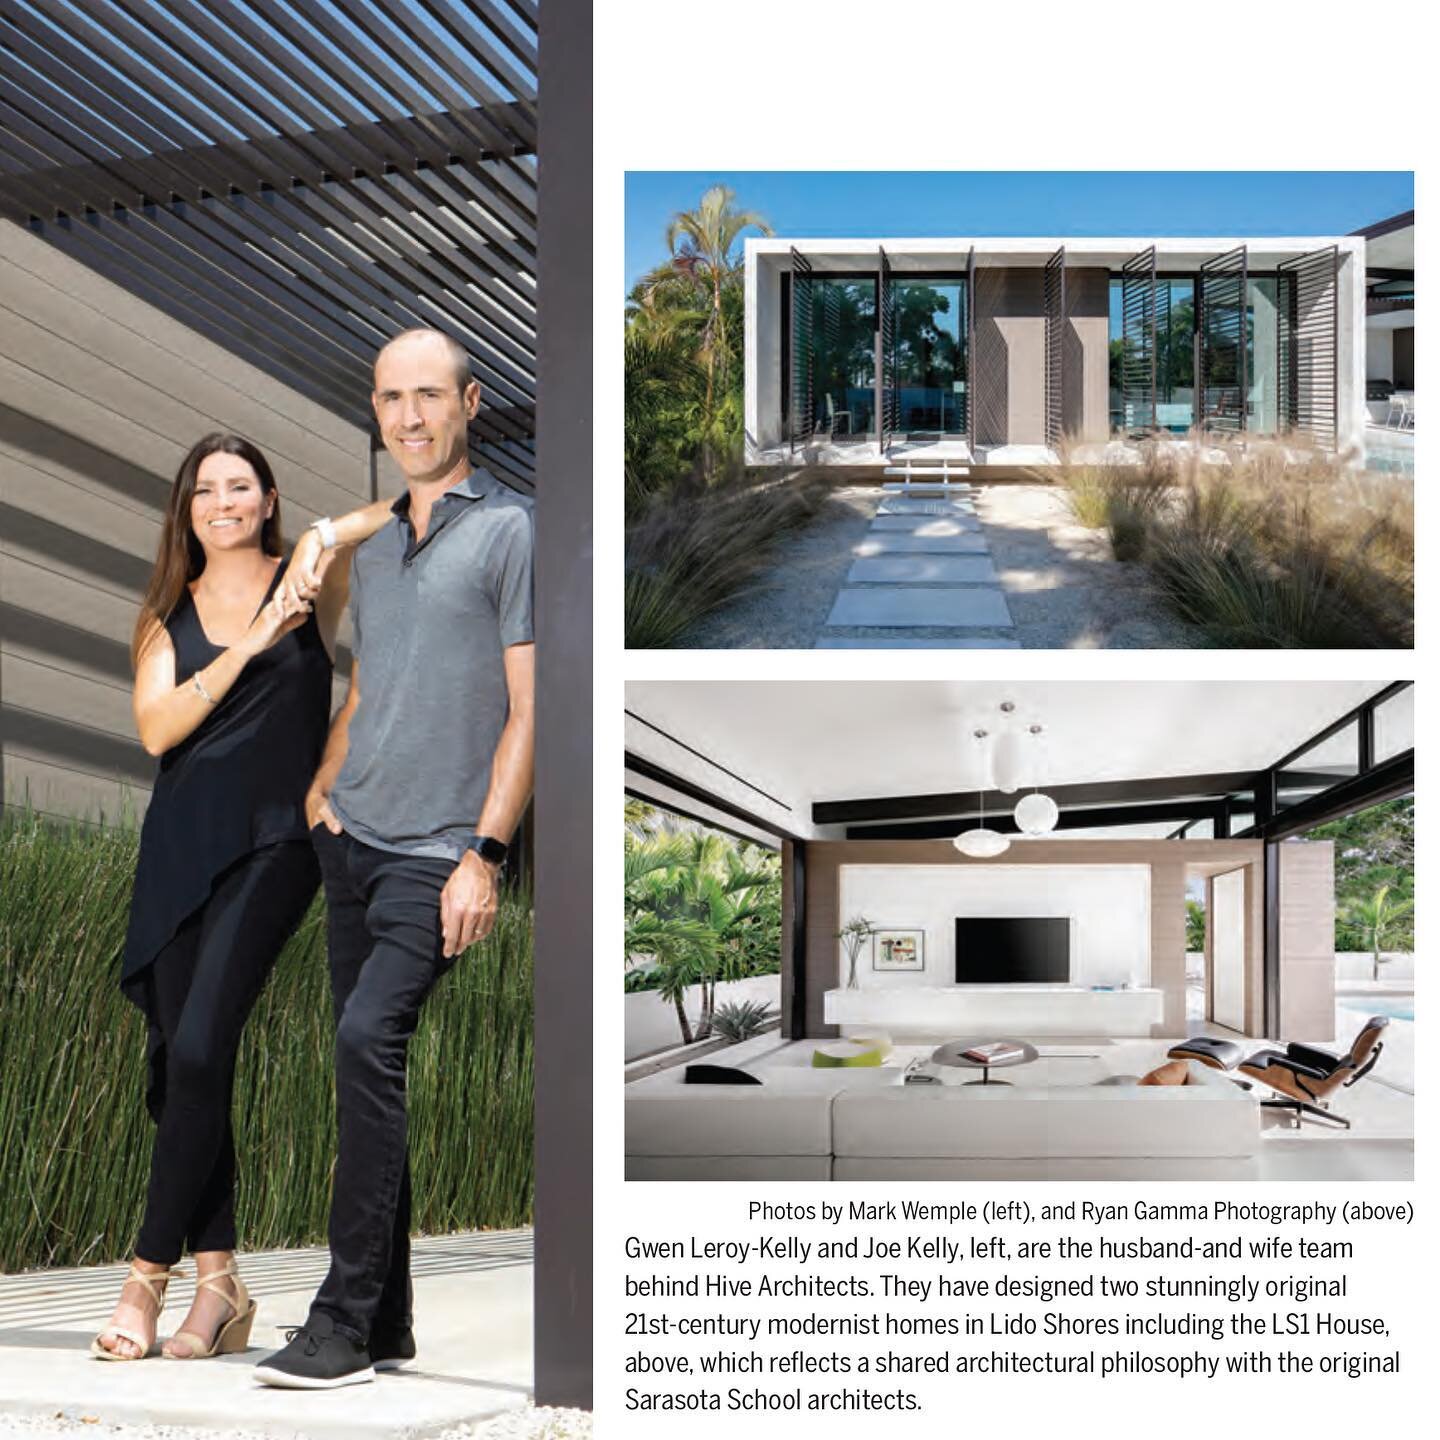 Thank you Key Life Magazine for featuring @hive_architects and the LS1 House in your Fall 2022 issue. We are grateful to be included in this article about the Sarasota School of Architecture. For the full article, titled Lido Shores: Back to the Futu